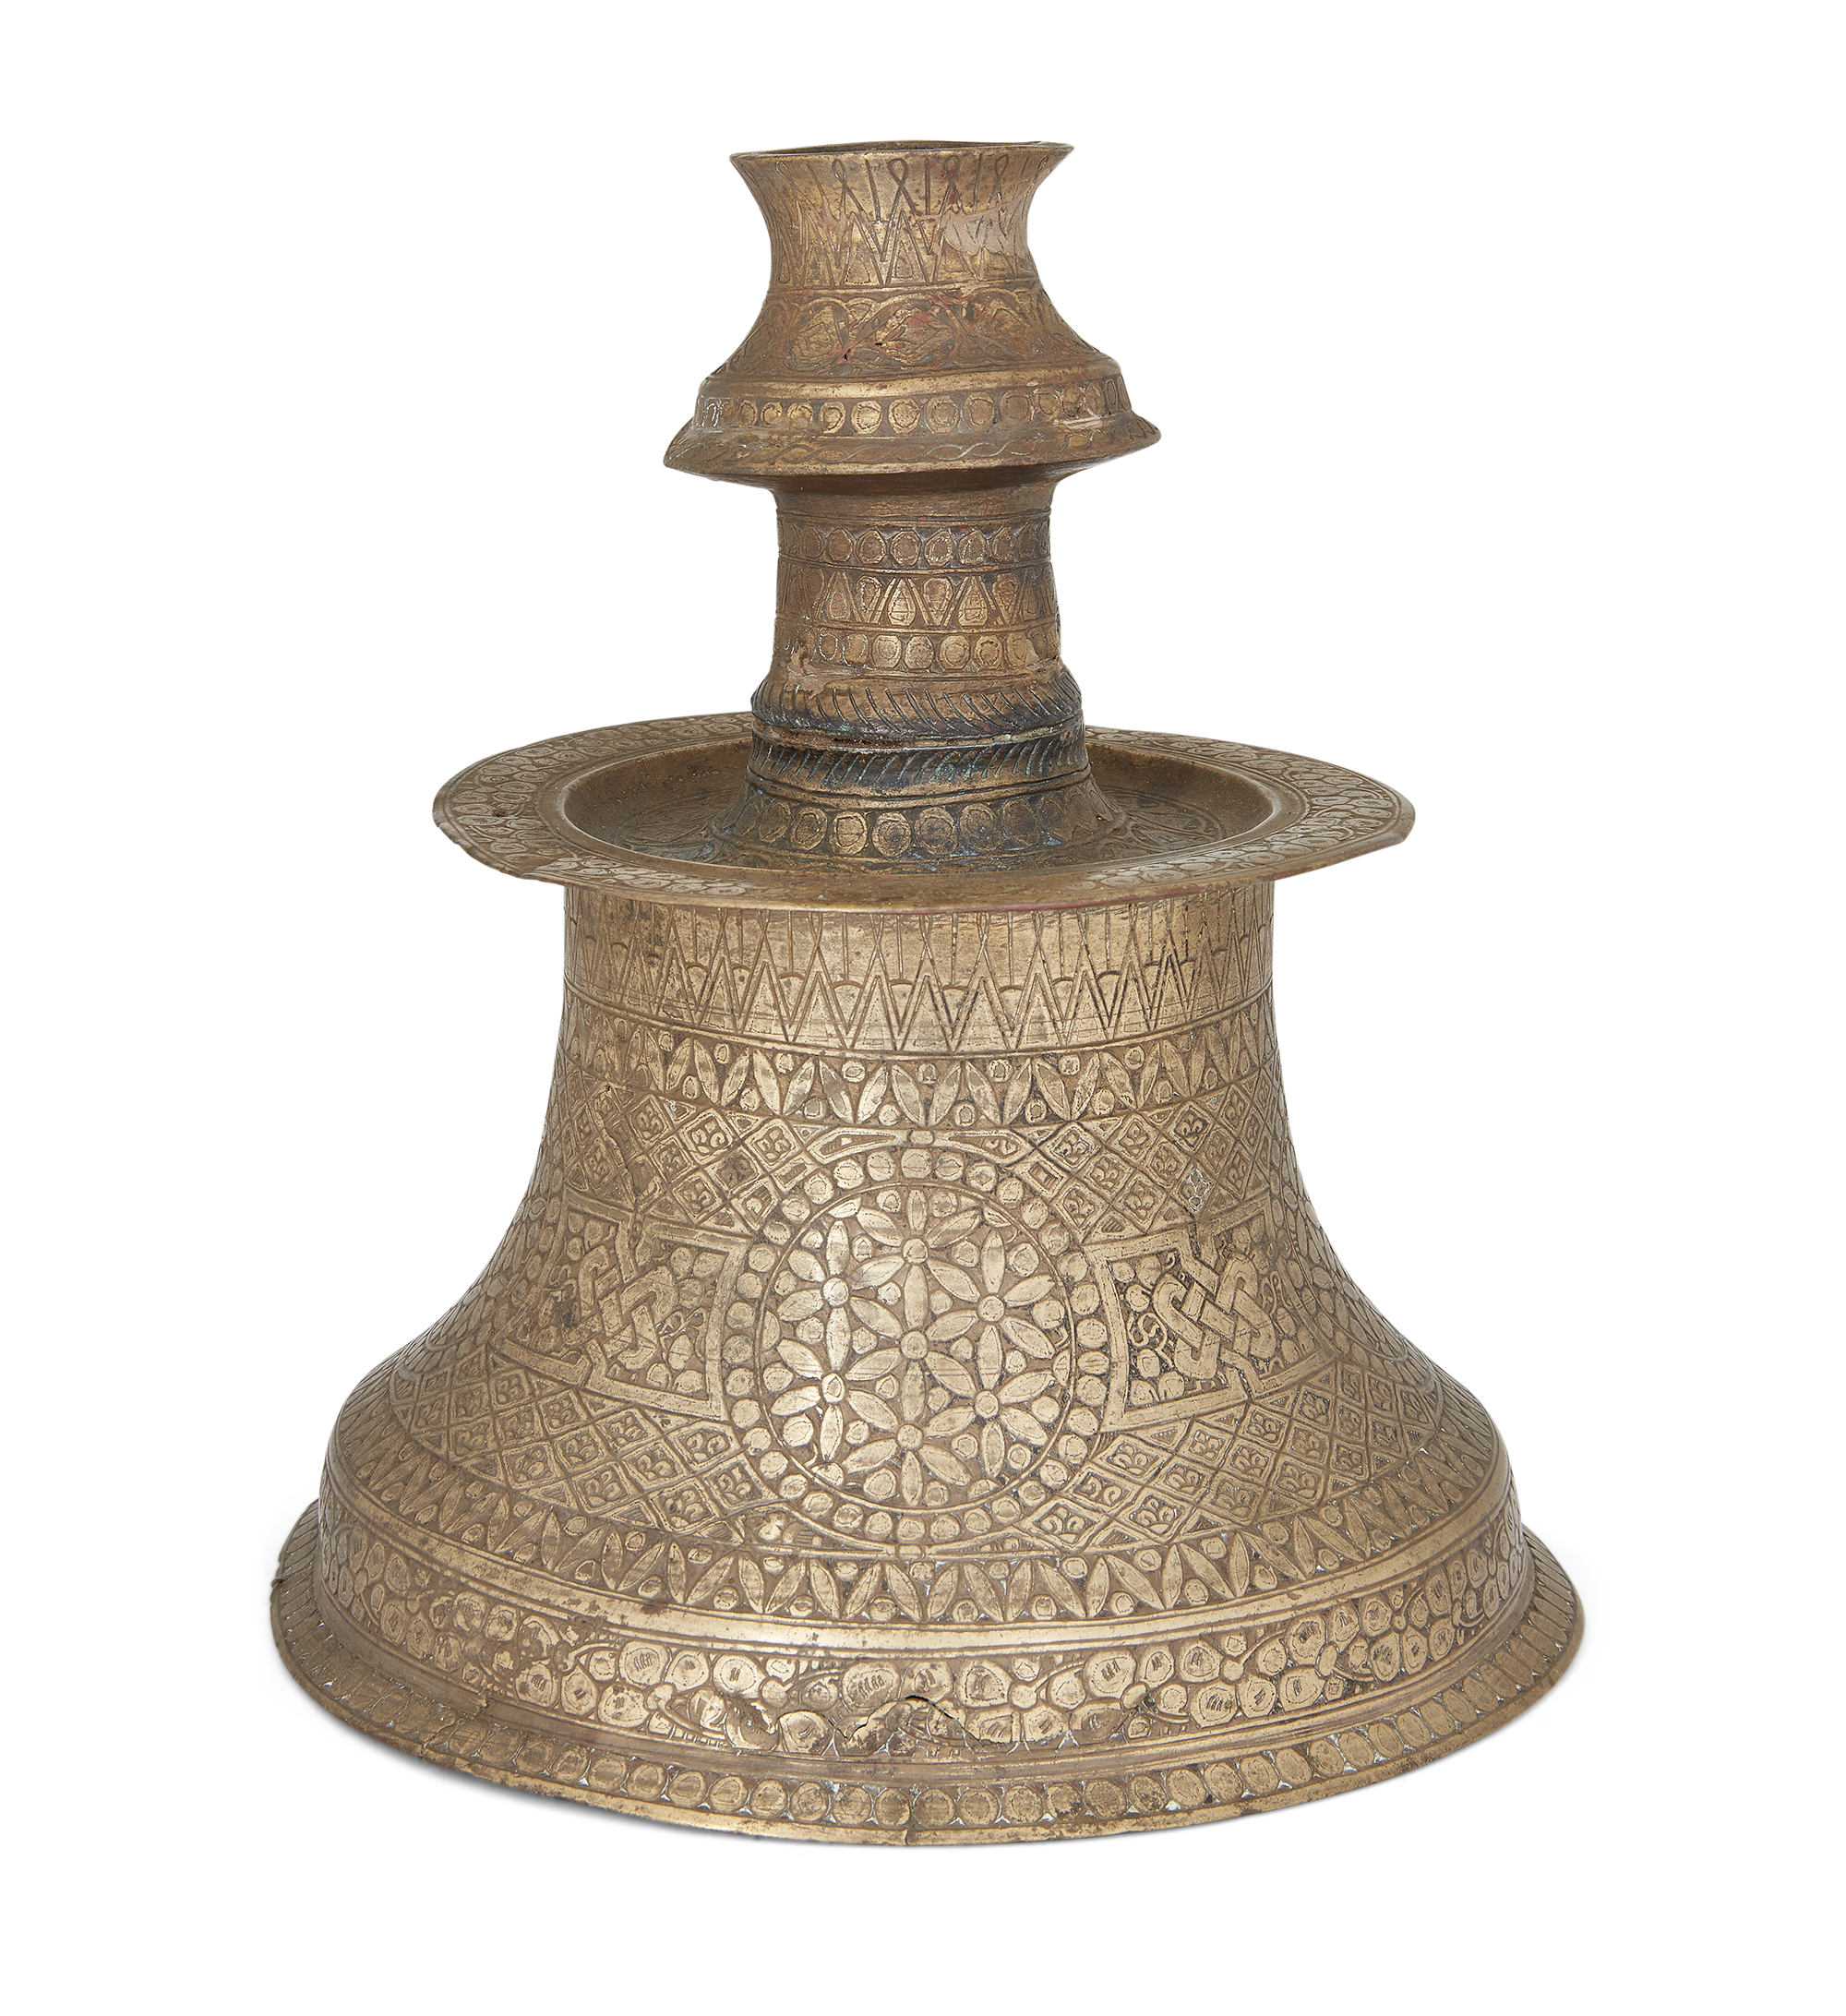 To Be Sold With No Reserve An engraved silver-inlaid brass candlestand, possibly Turkish provinc...